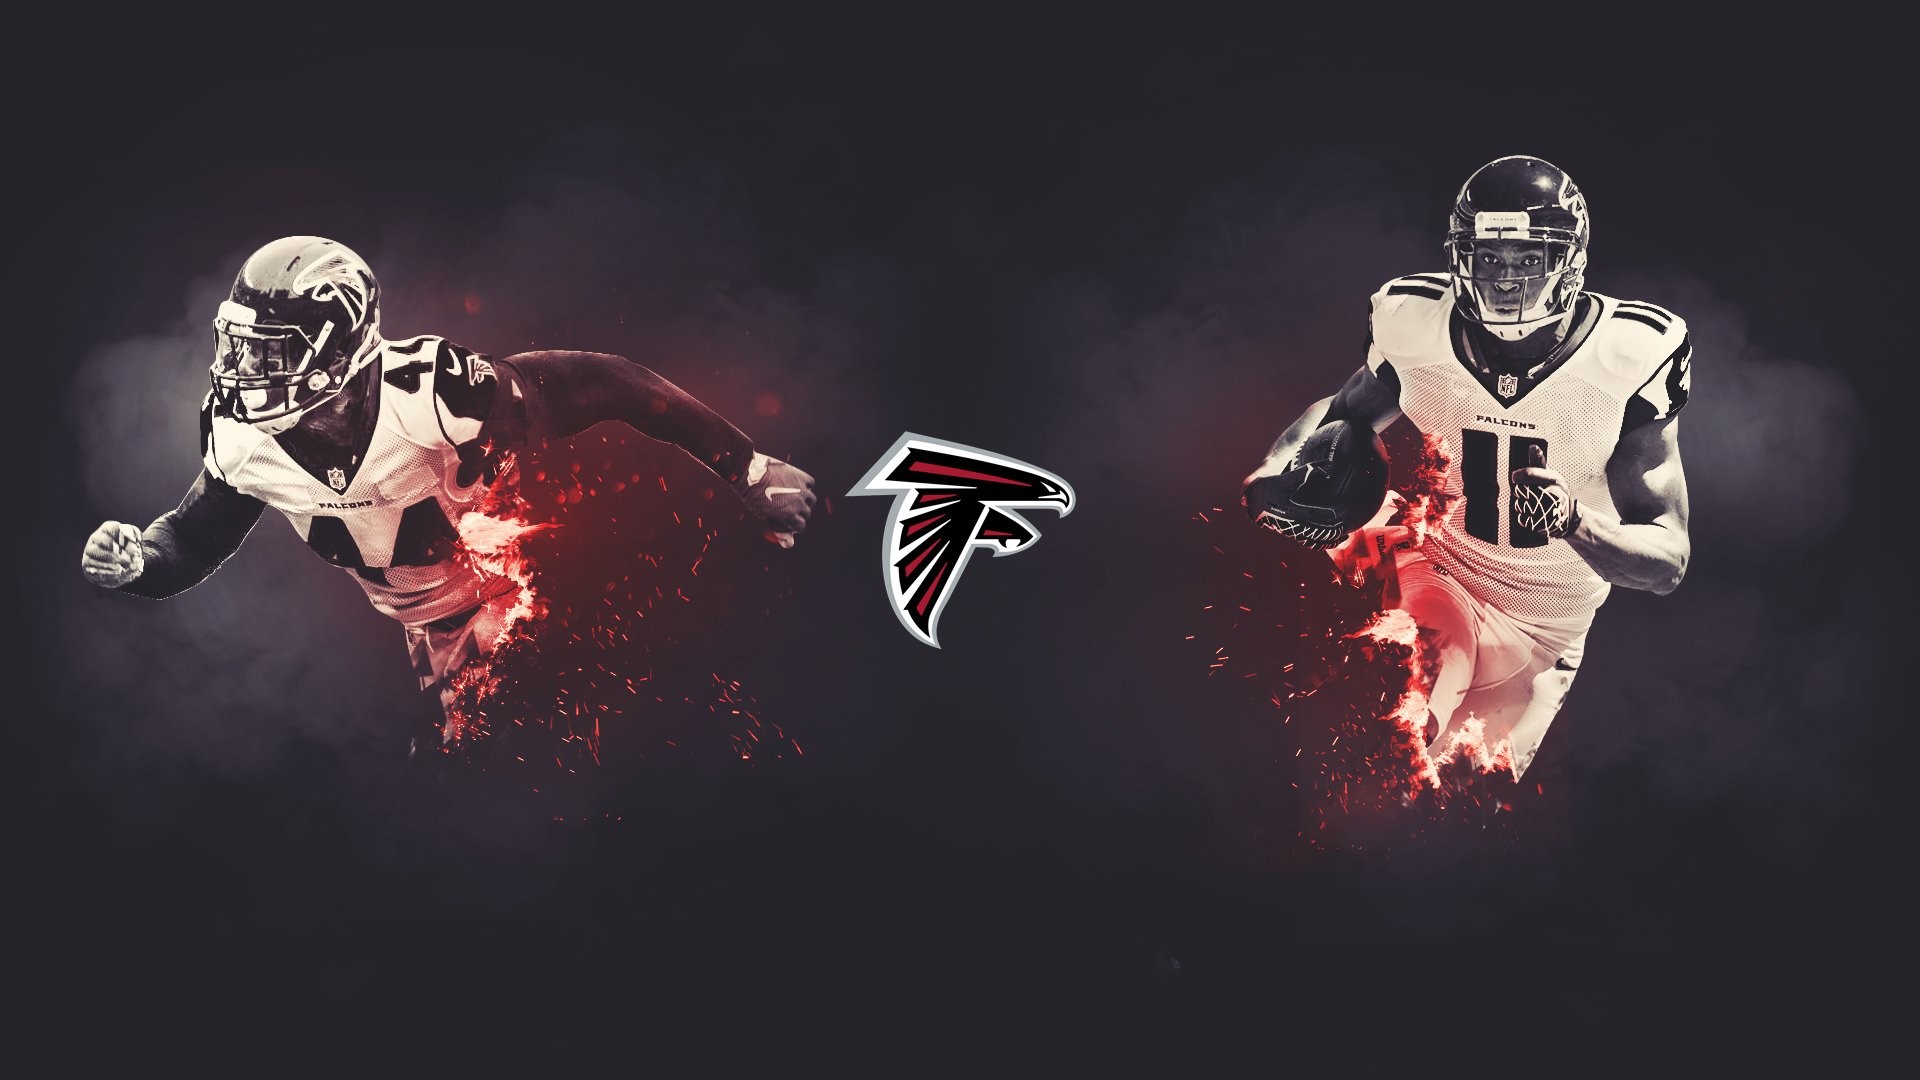 1920x1080 I Made Another Falcons Wallpaper. Feel Free To Use.